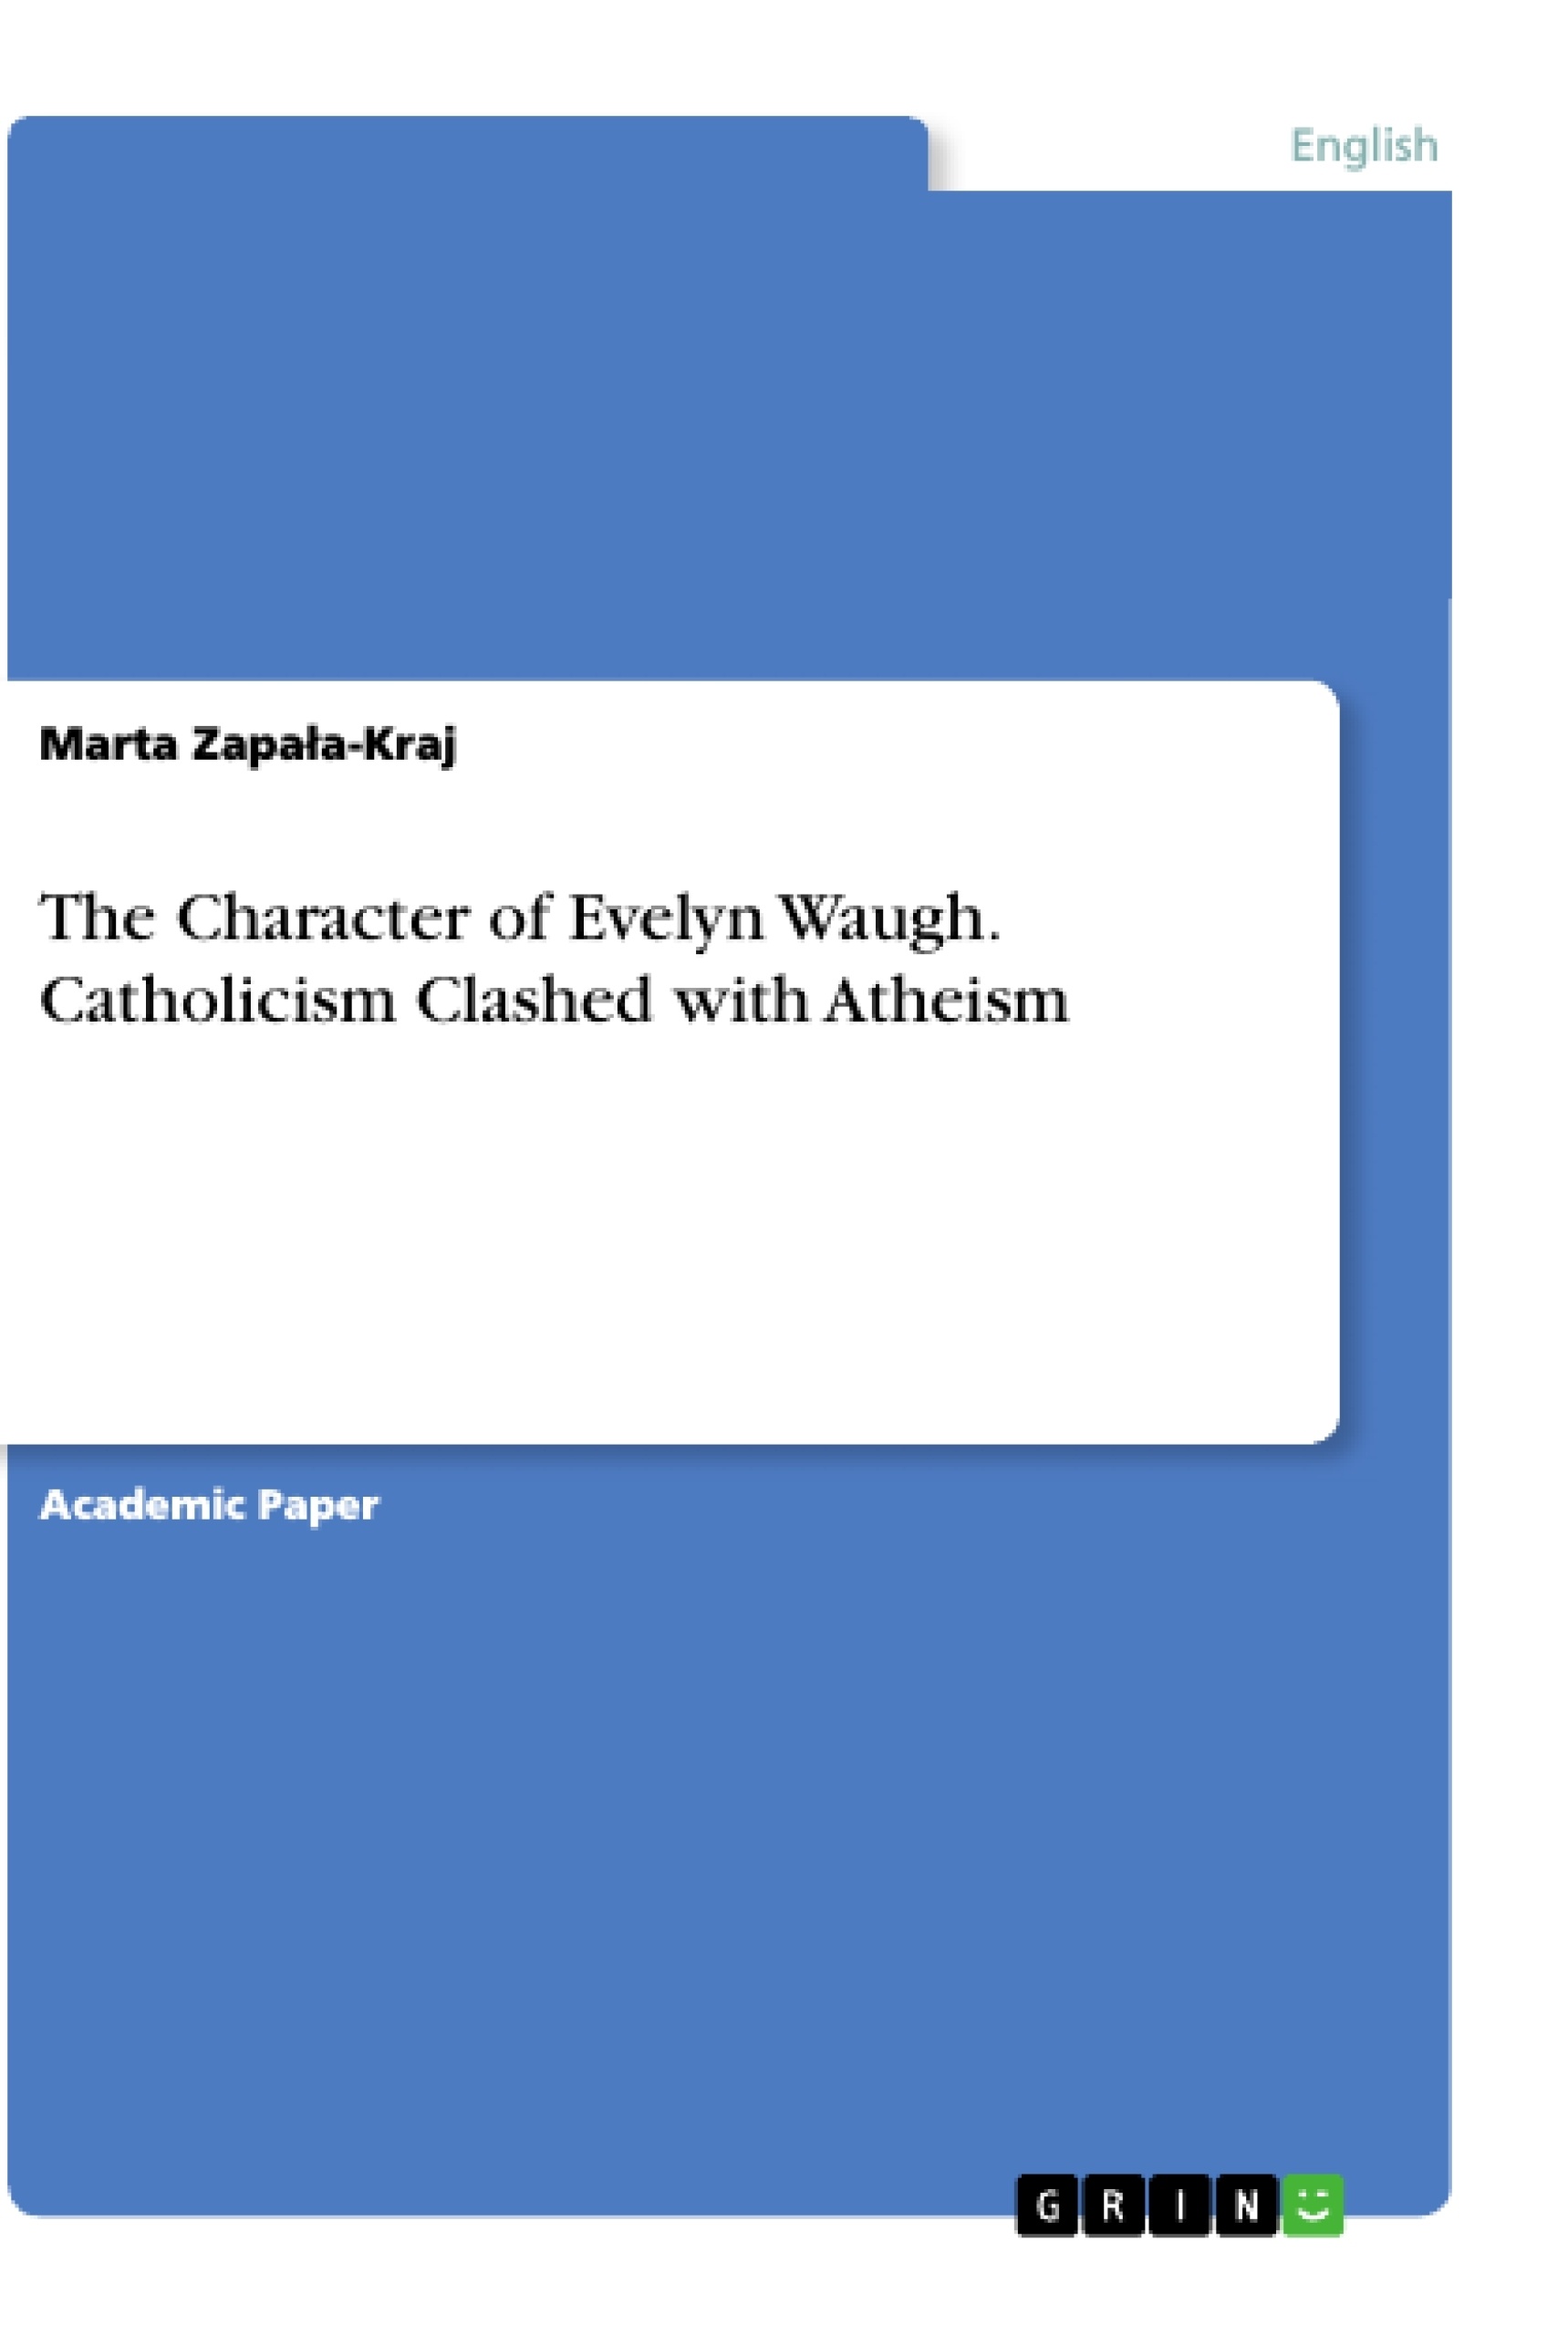 Titel: The Character of Evelyn Waugh. Catholicism Clashed with Atheism